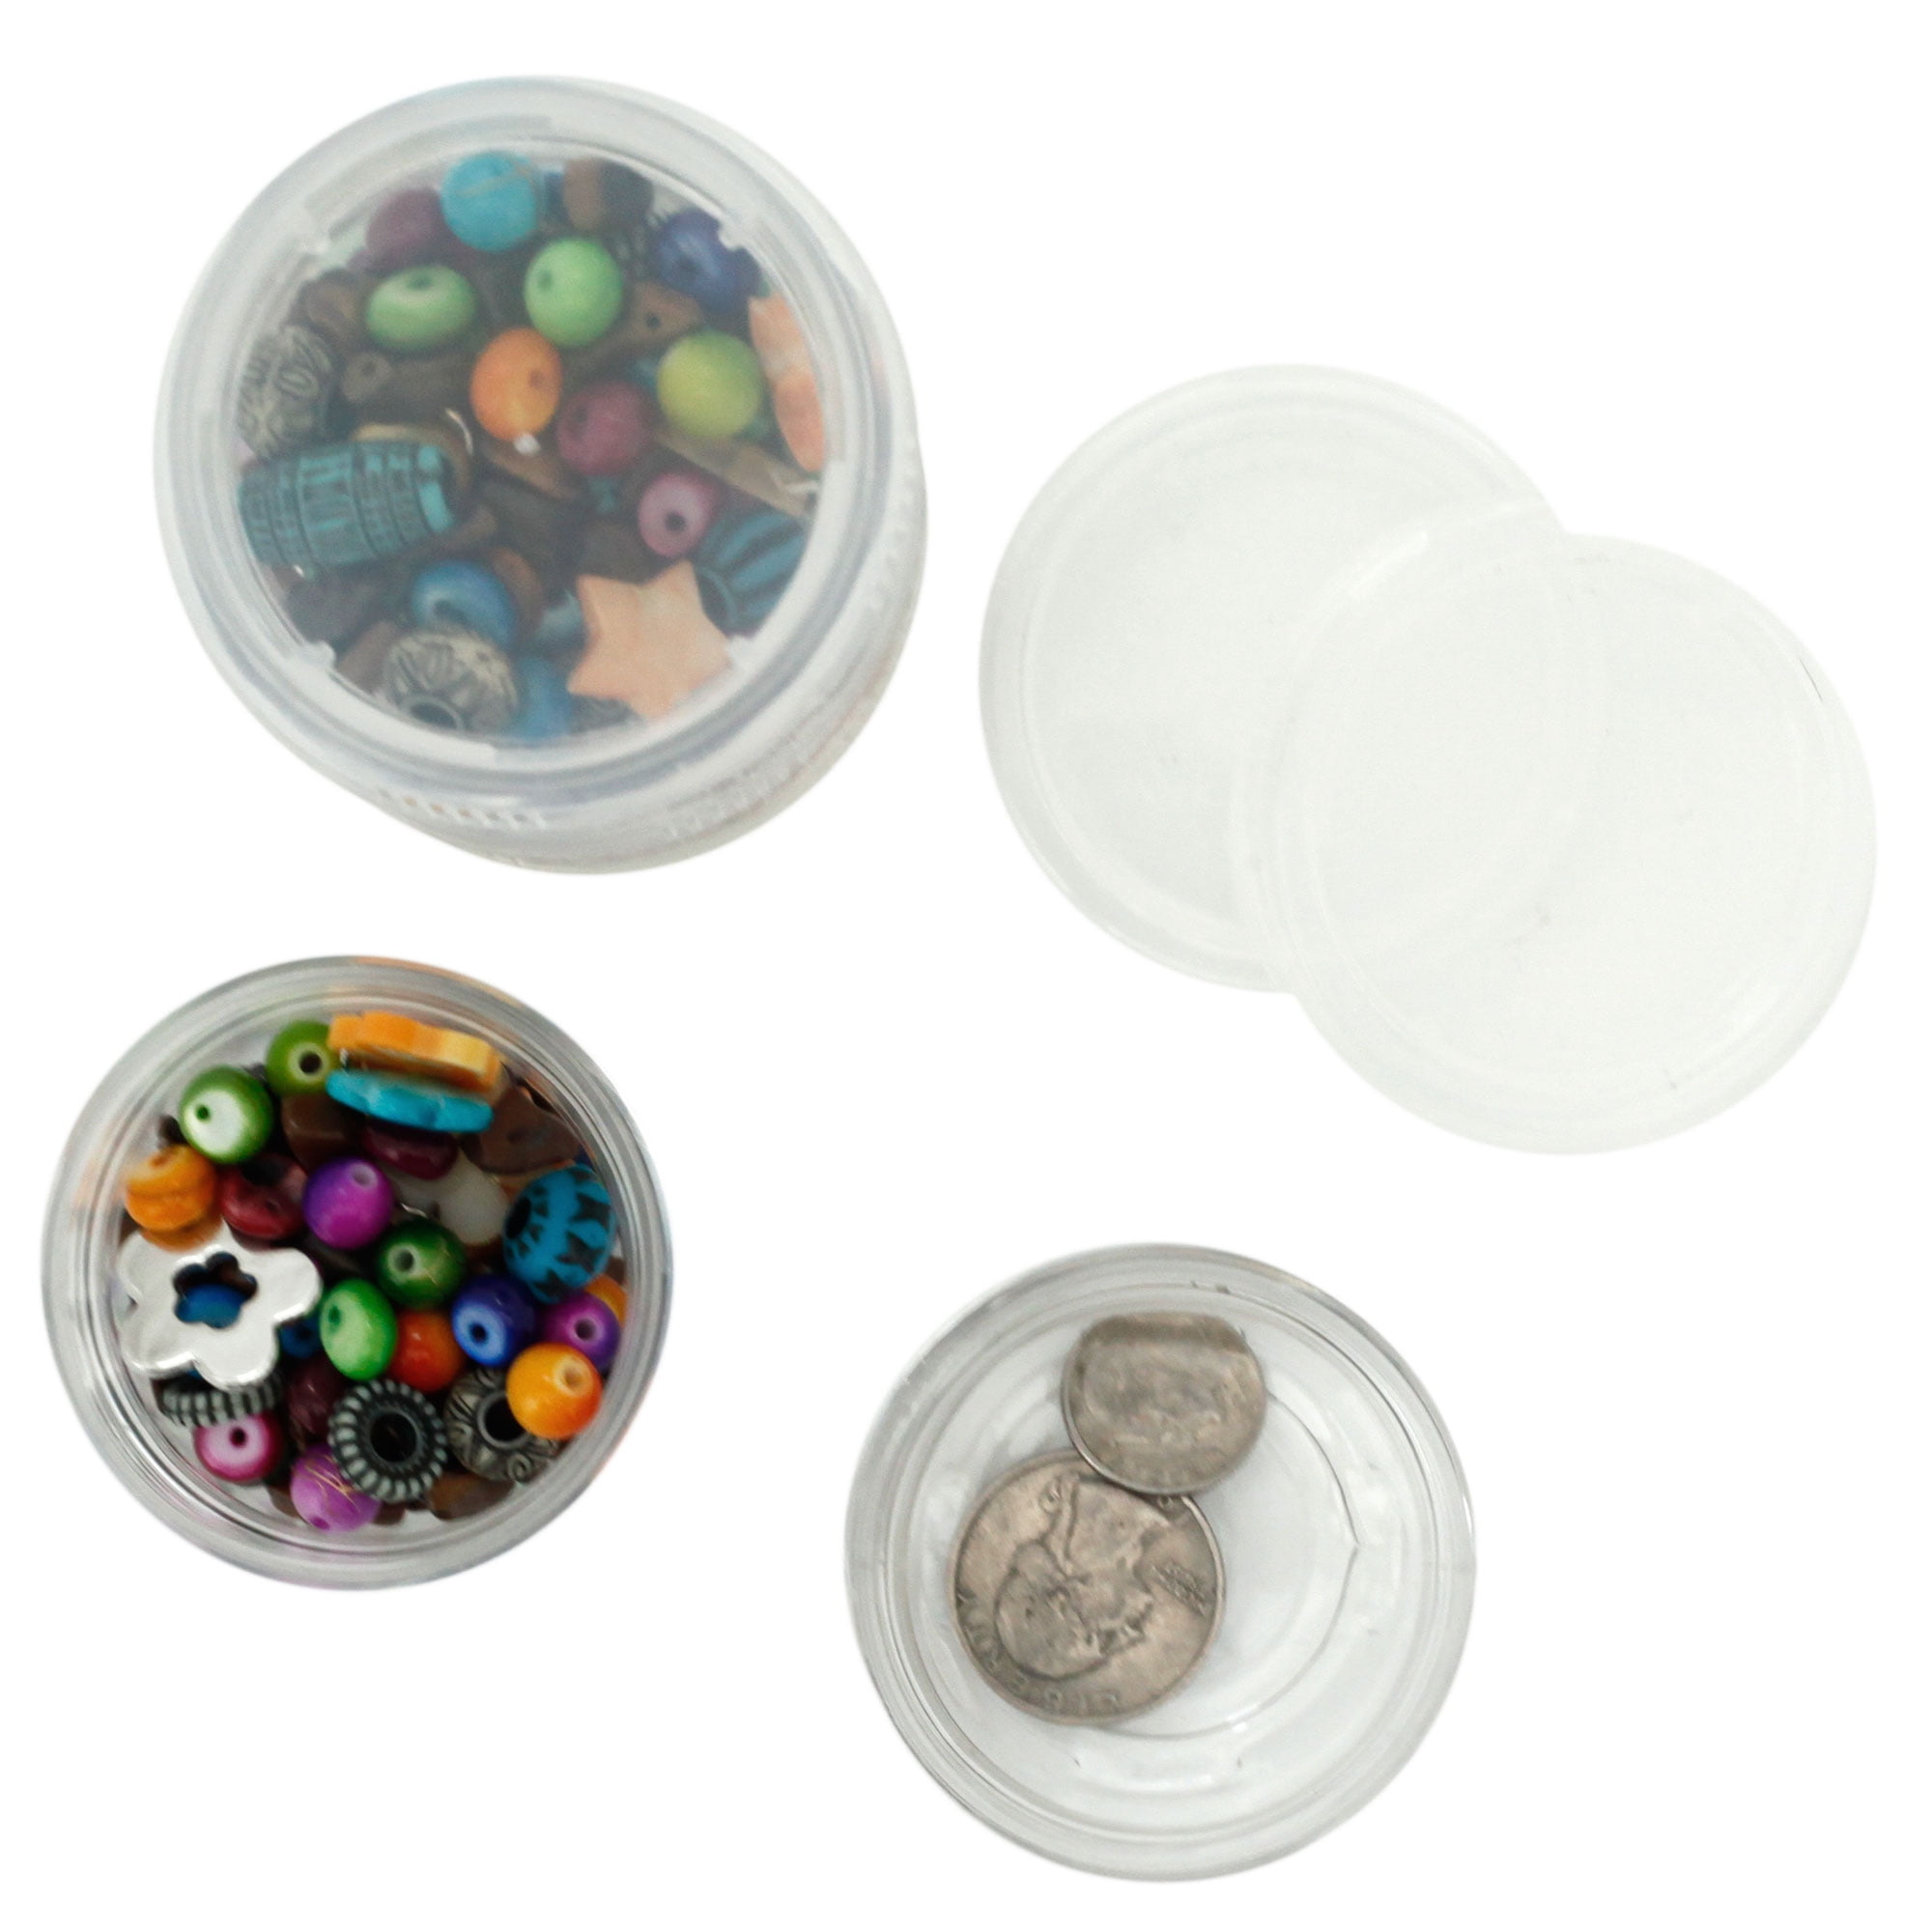 Cntb111 6 Storage Stackable Containers for Beads Crafts 2.75 Round Clear  Home for sale online